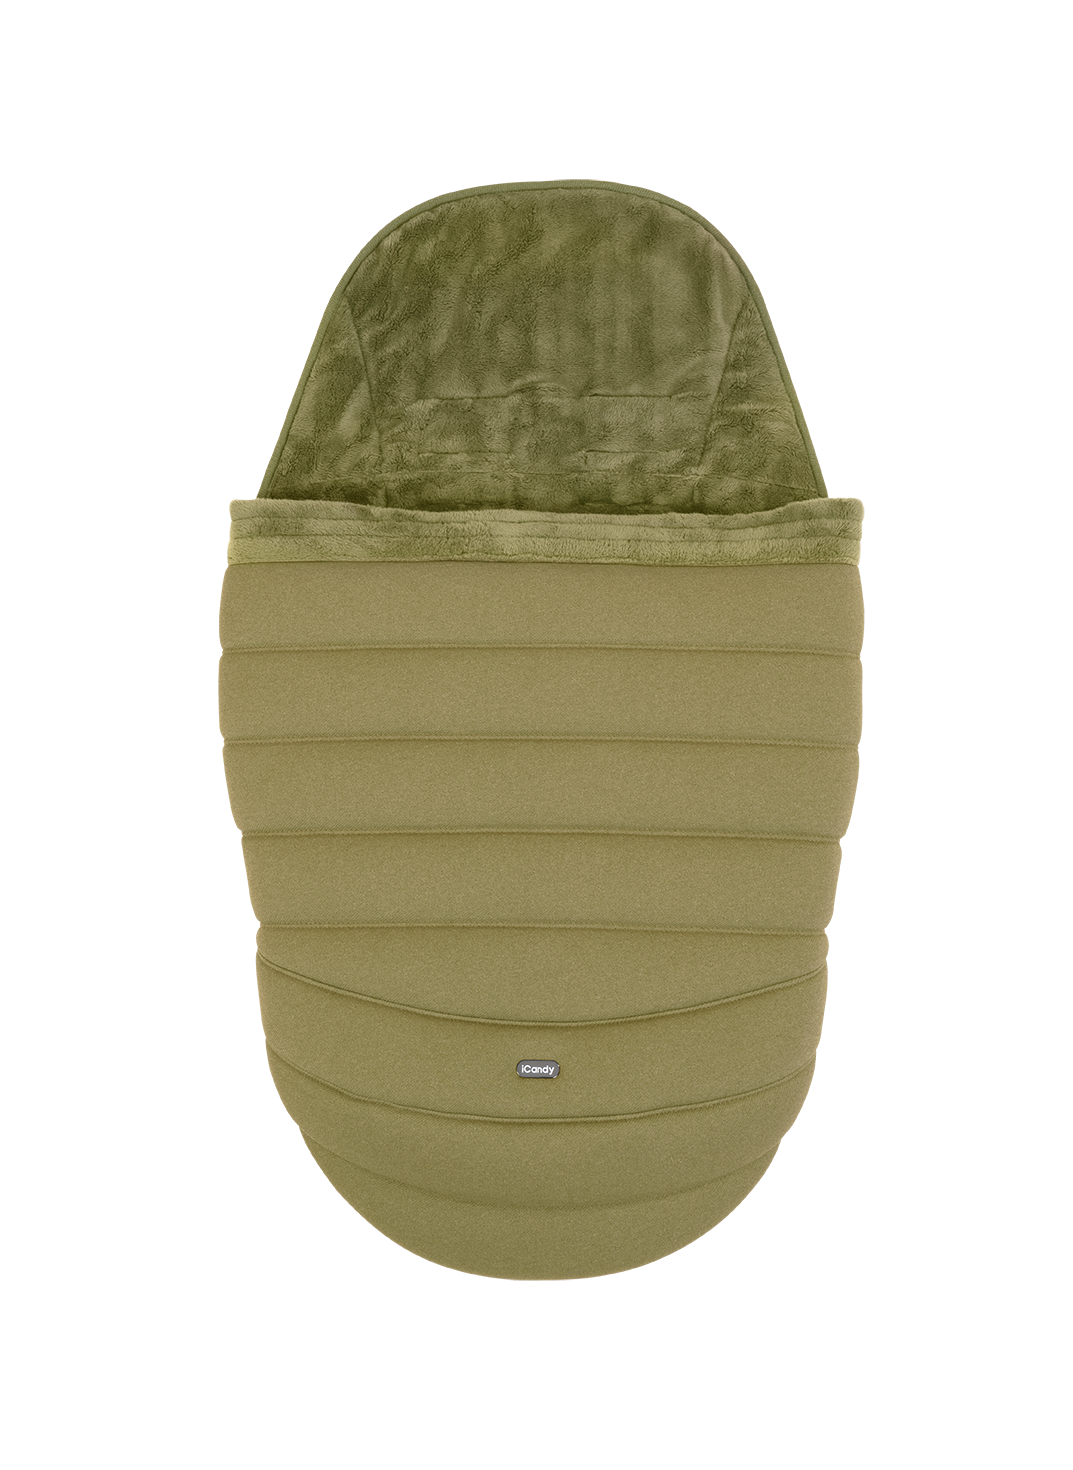 iCandy Peach 7 Duo Pod | Olive Green